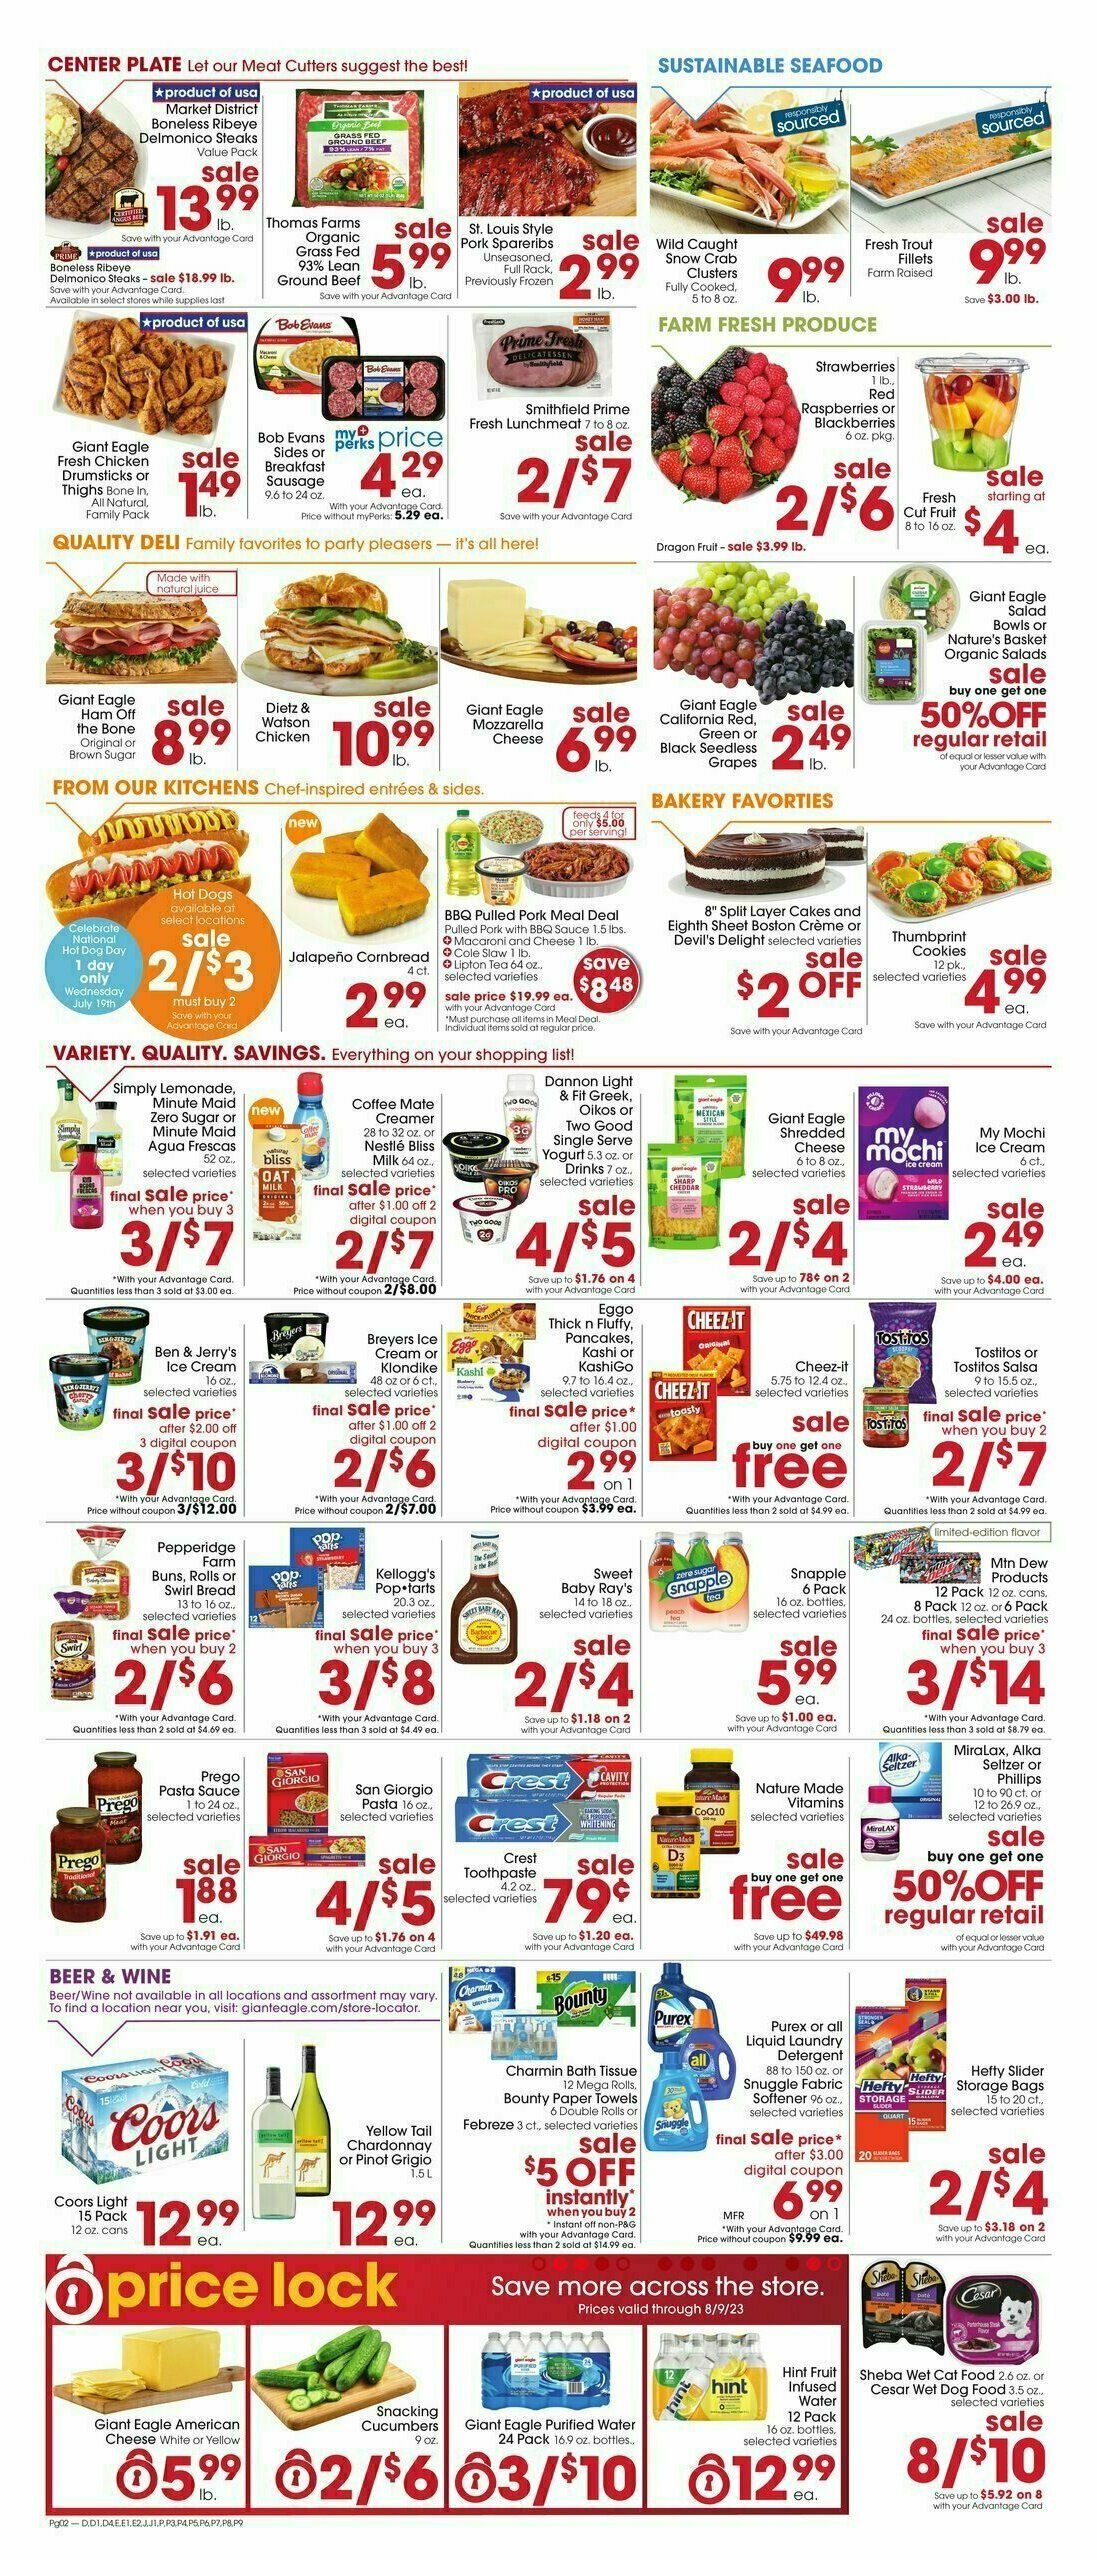 Giant Eagle Weekly Ad from July 13